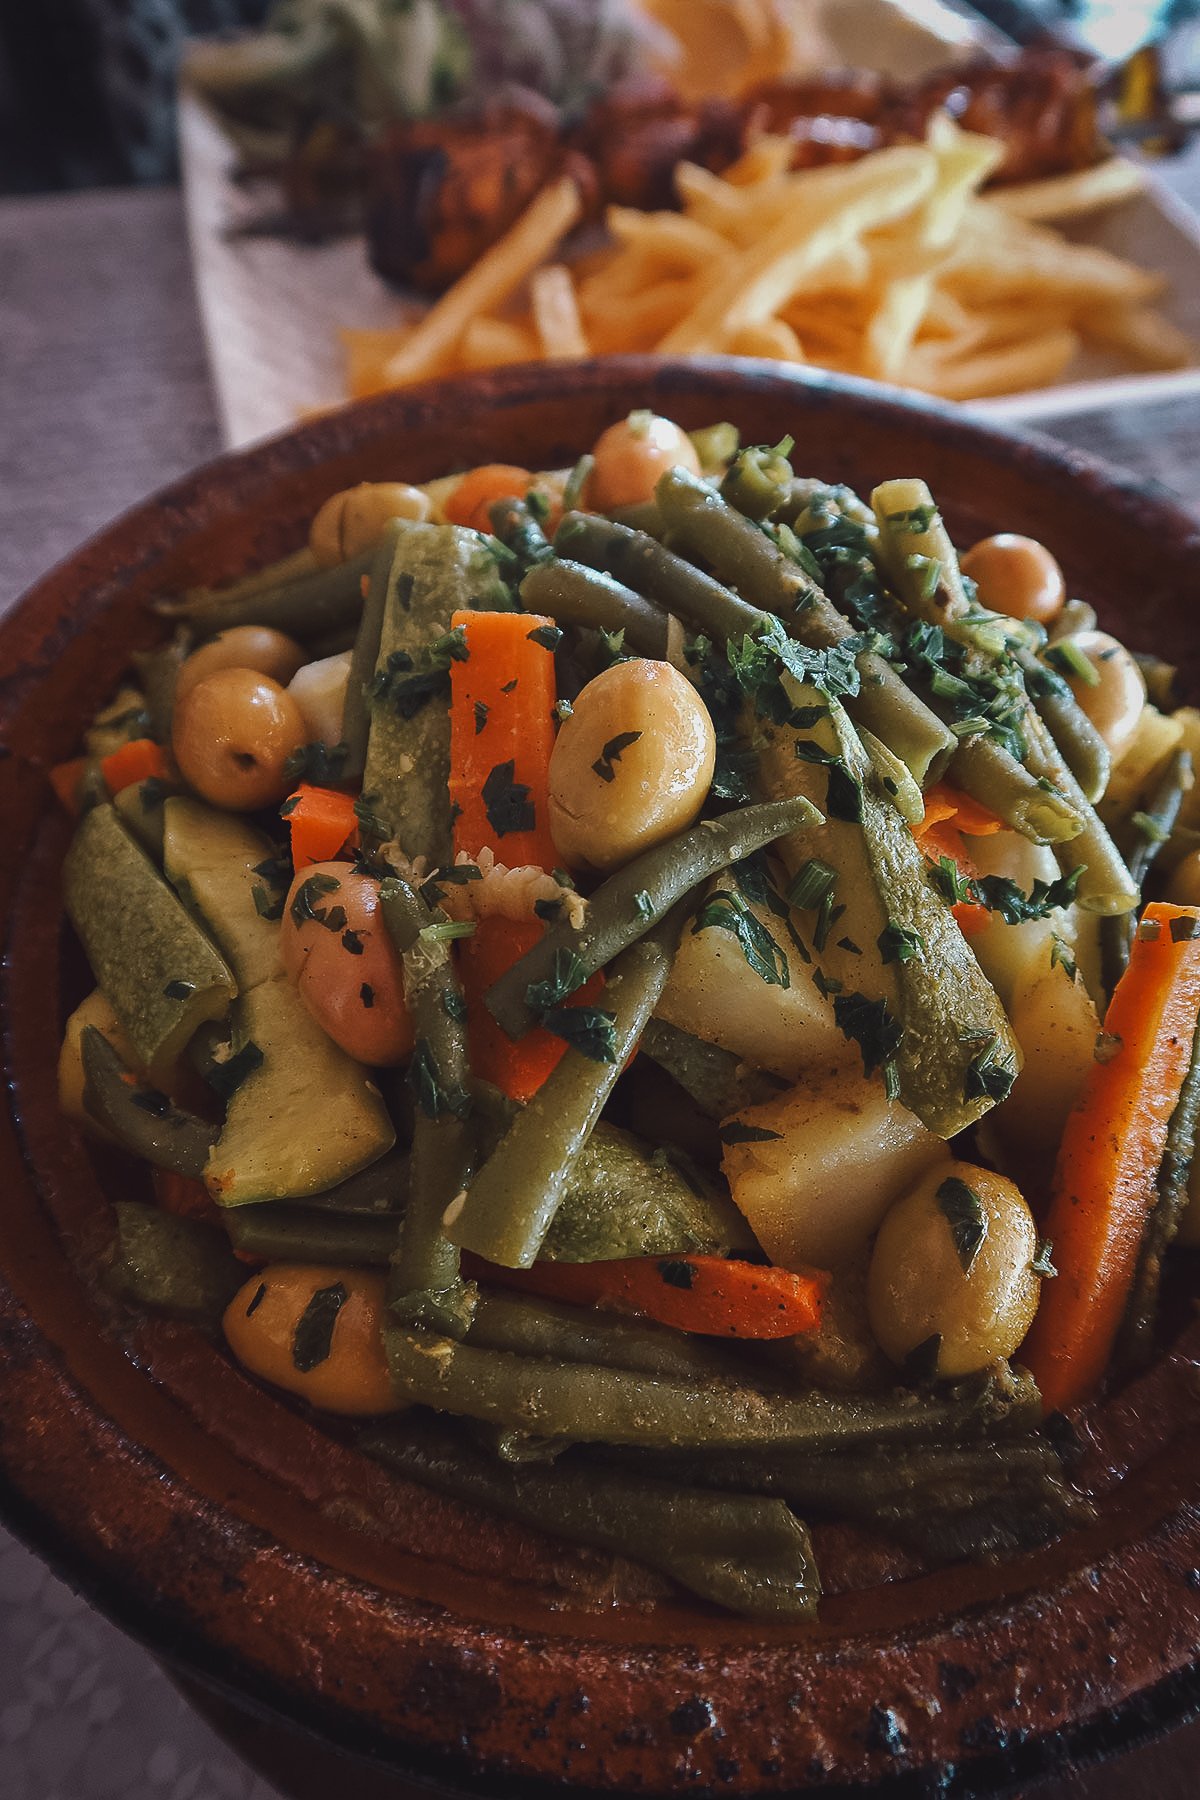 Vegetable tagine at a restaurant in Marrakech